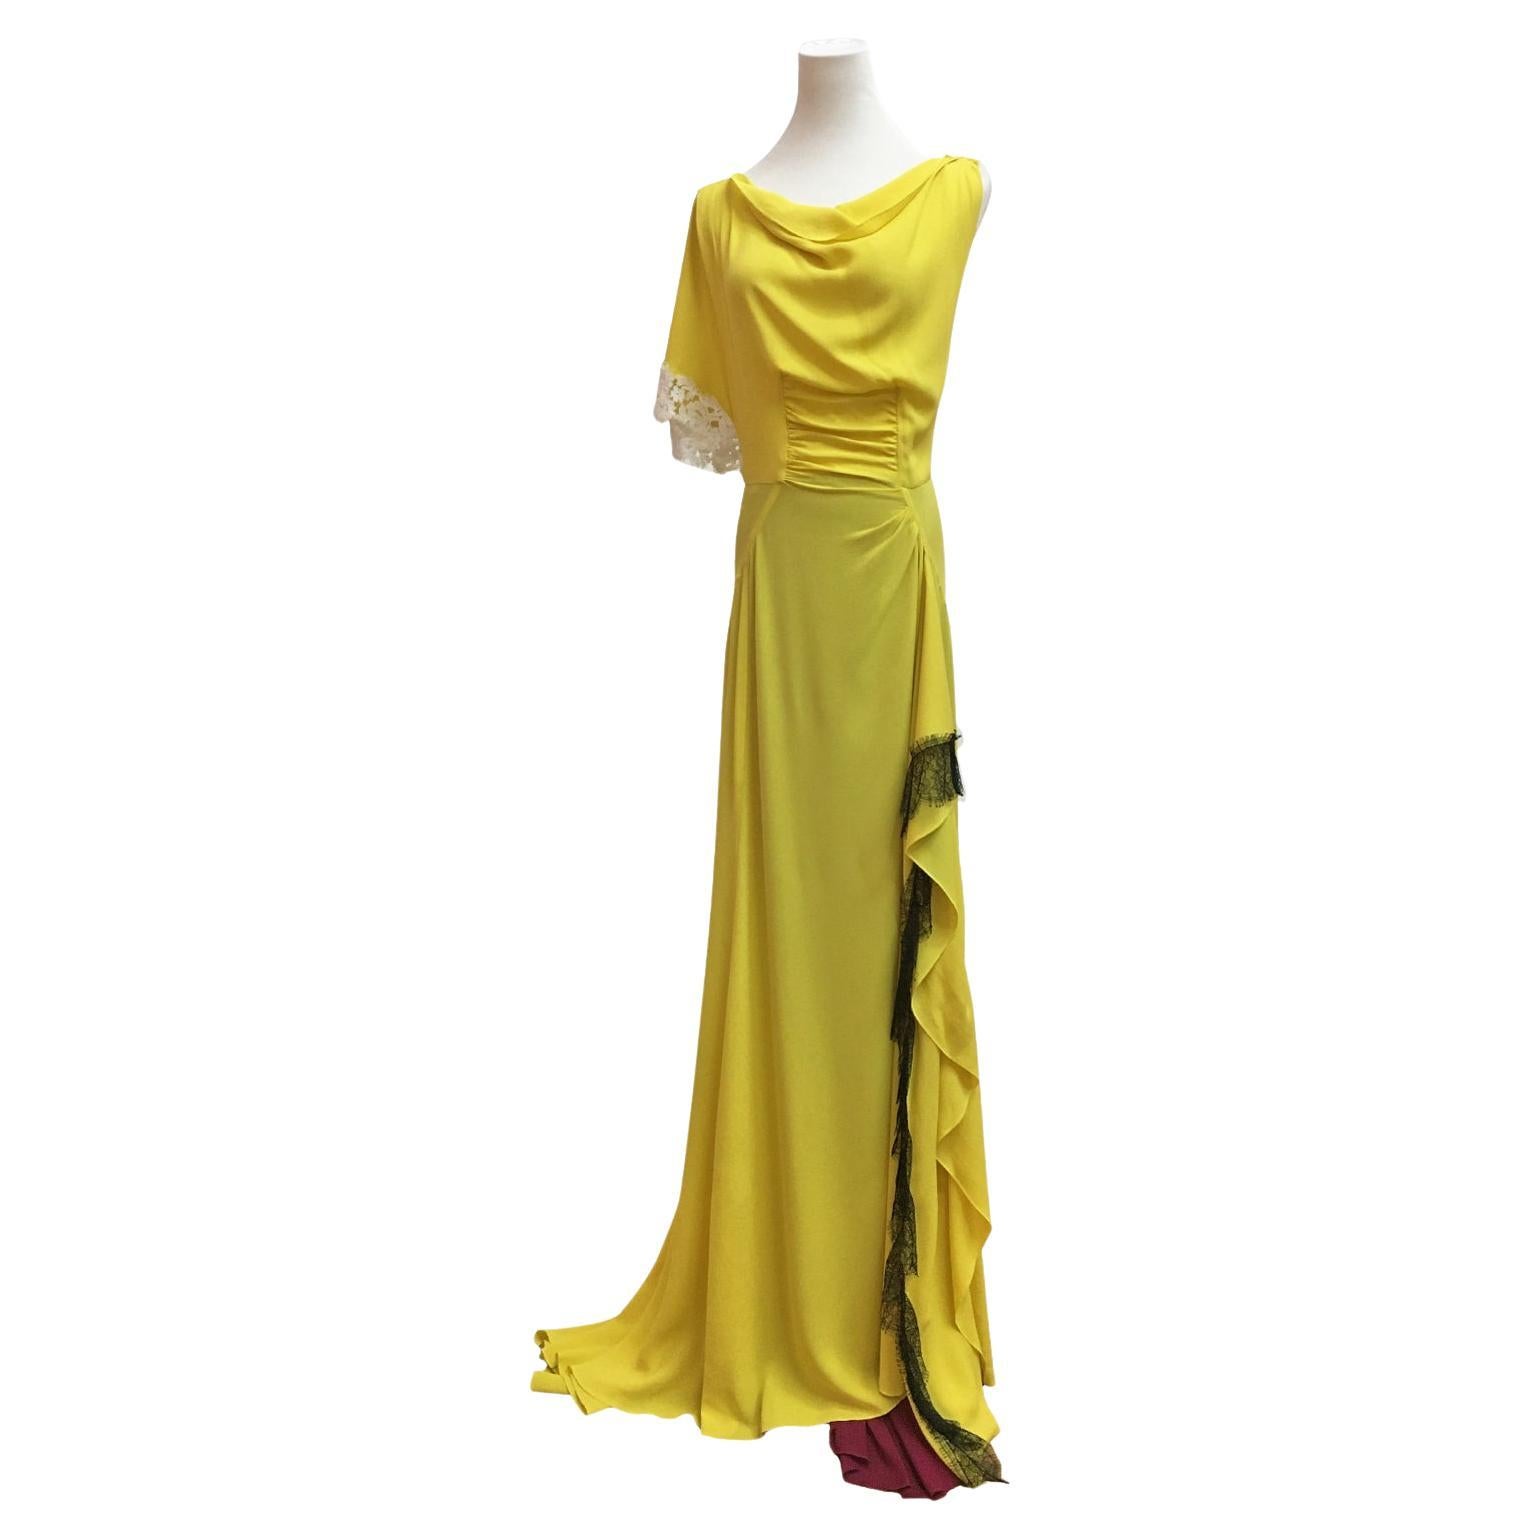 Nina Ricci Olivier Theyskens Sample Dress Gown Yellow Black Lace circa 2010 For Sale